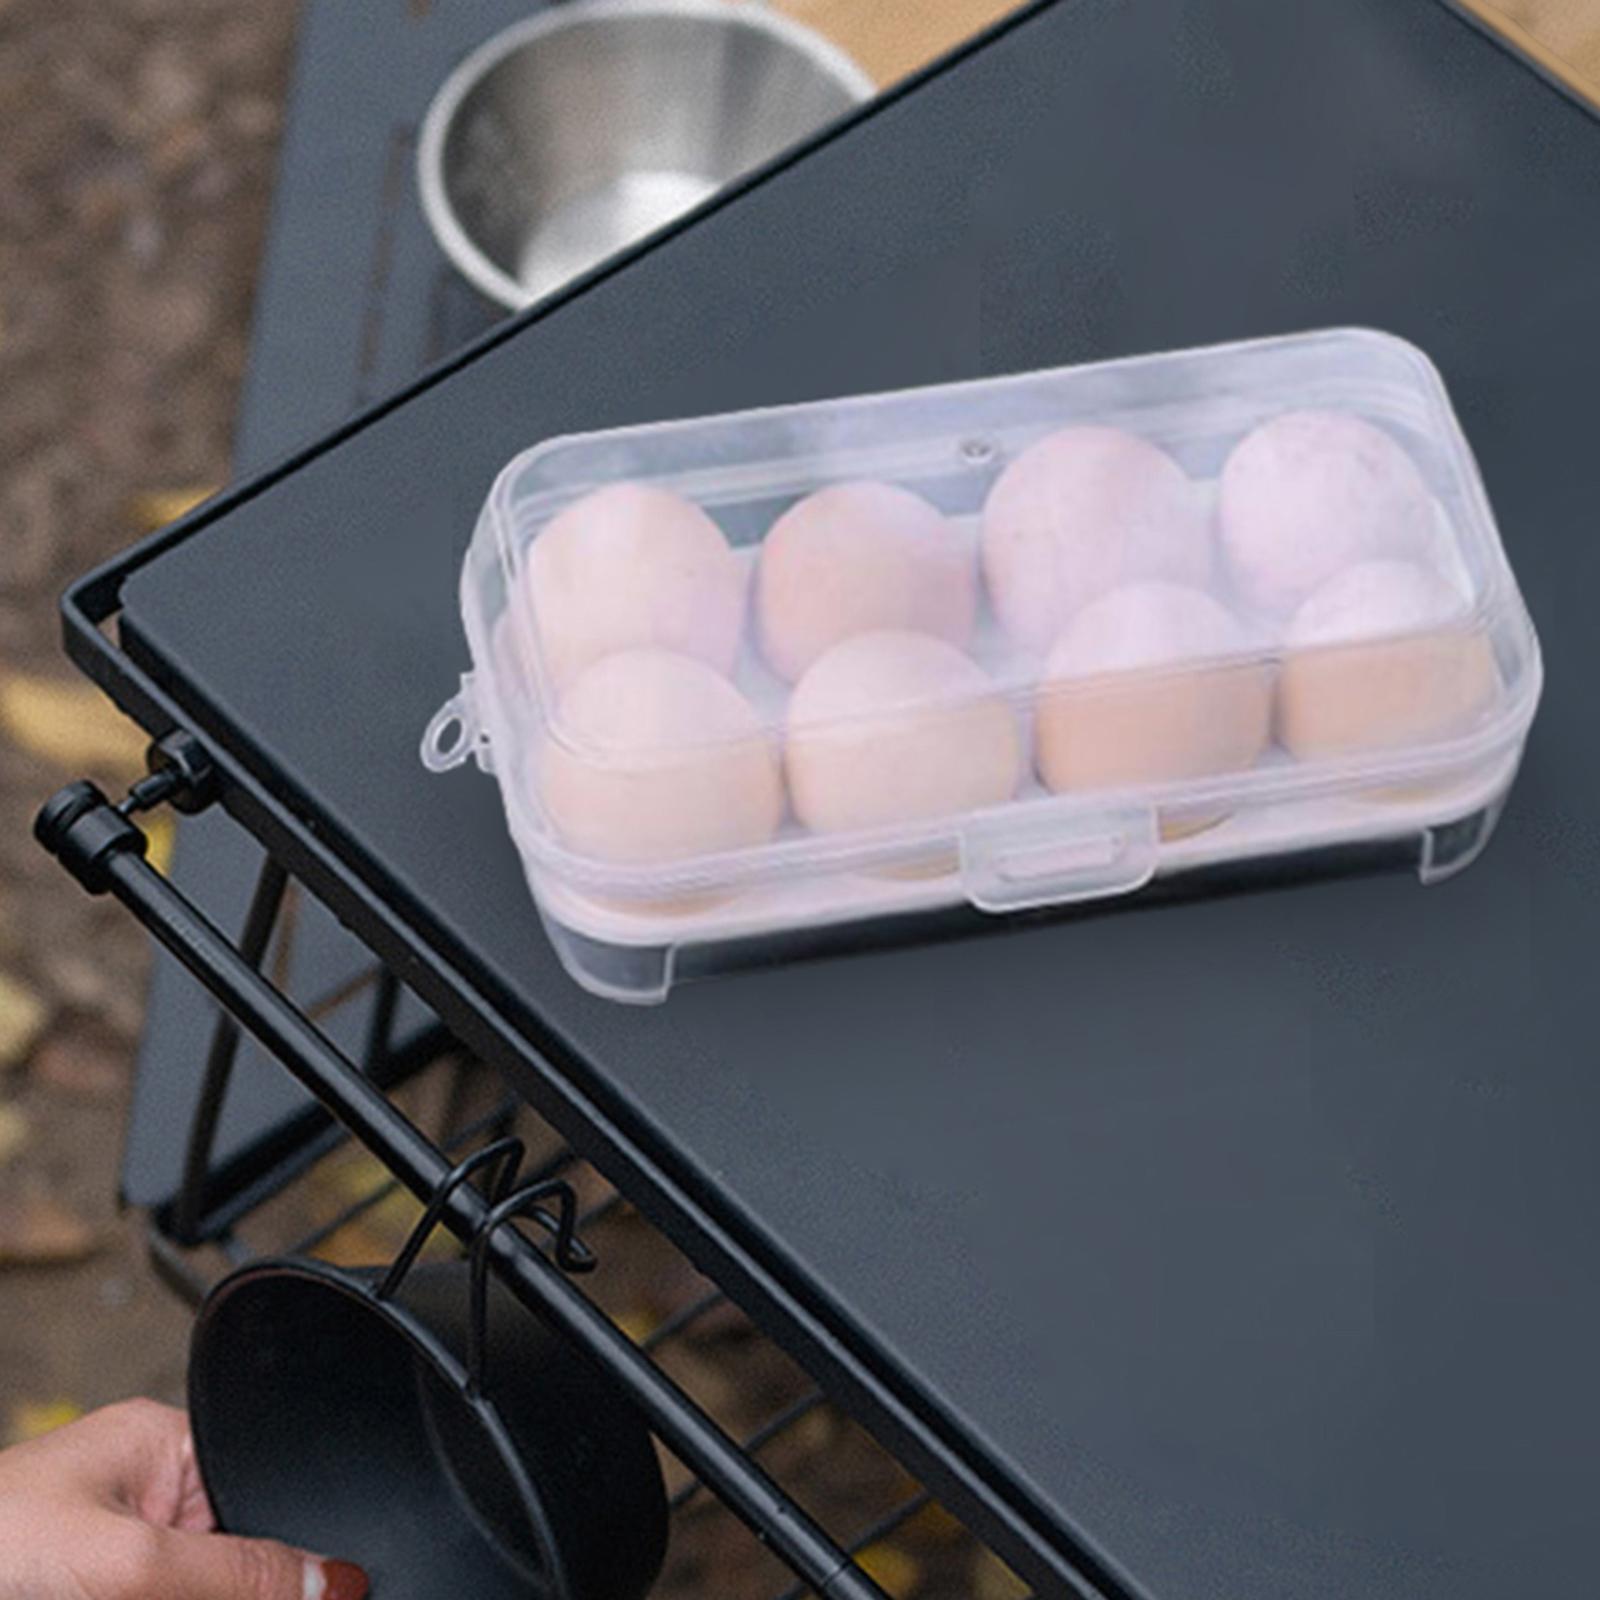 Egg Storage Box Egg Holder Tray Egg Protection Home Portable Organizer Egg Container Case for Fishing, Fresh Eggs, Refrigerator, Cooking, Travel